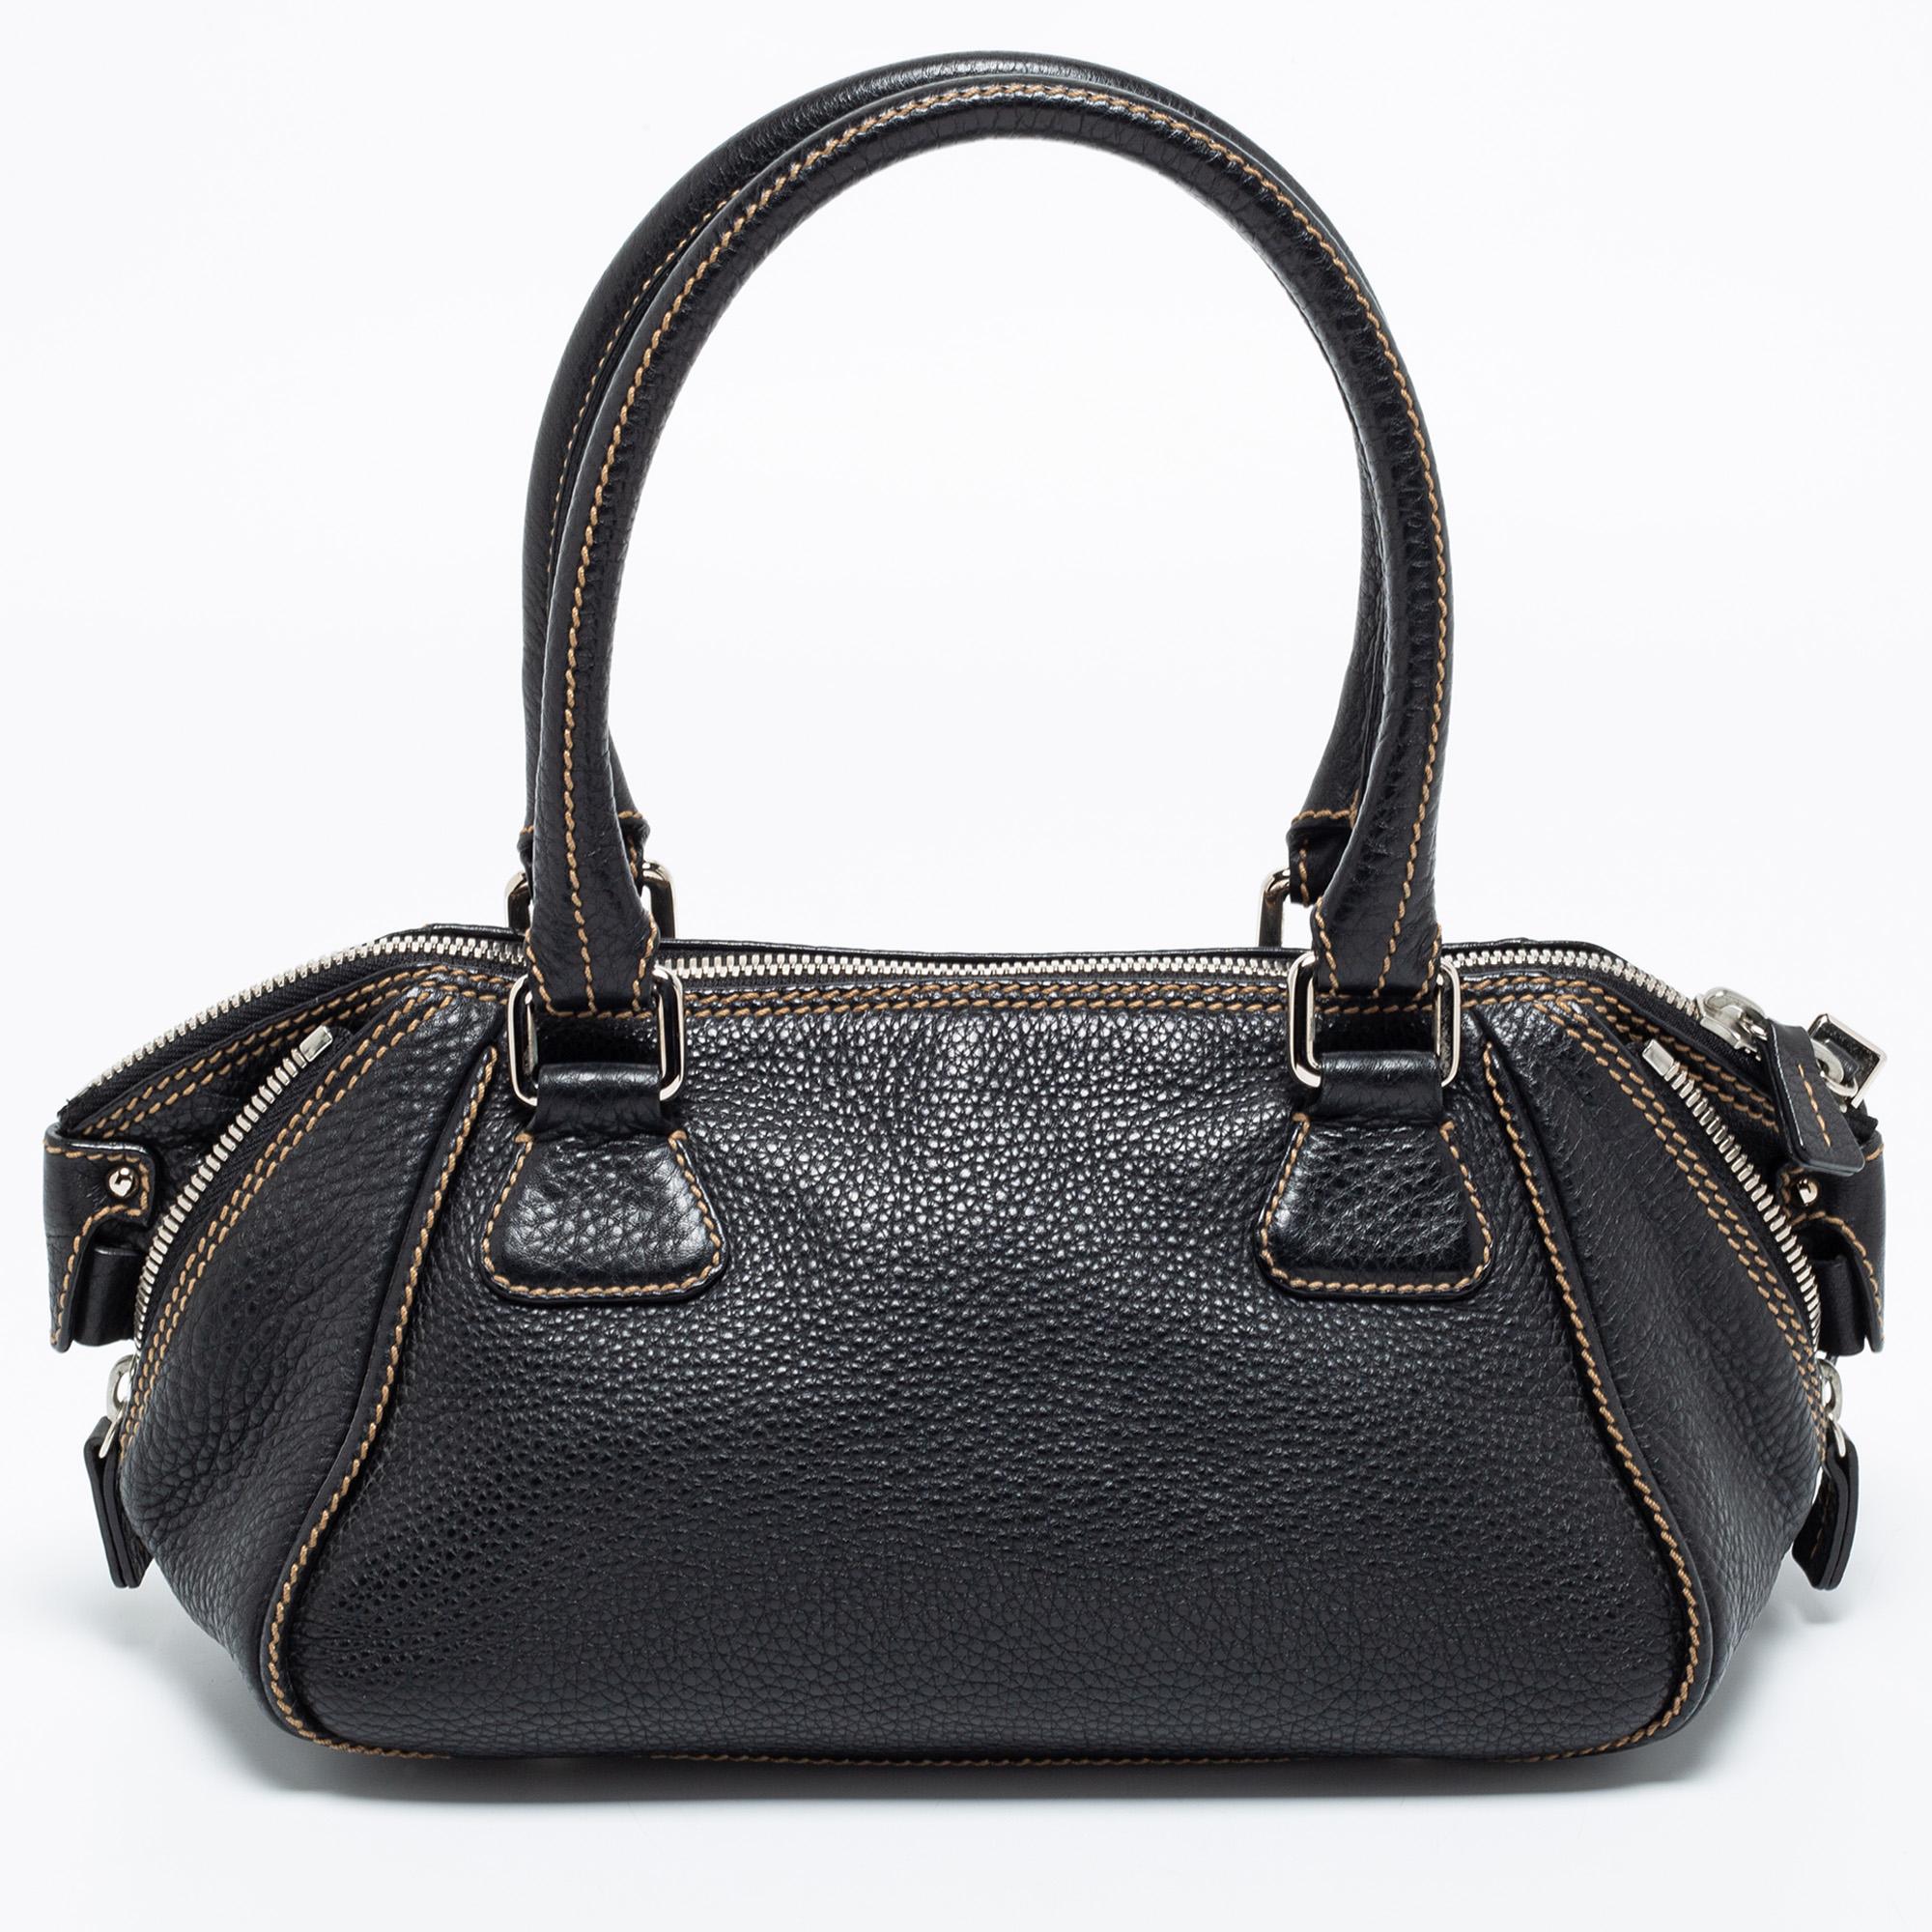 Make this sophisticated bag by Chanel your own! It is made from black leather and features a tassel detail on the side. Dual handles and a zip closure reveal a spacious fabric interior to house your essentials. This one is the perfect day